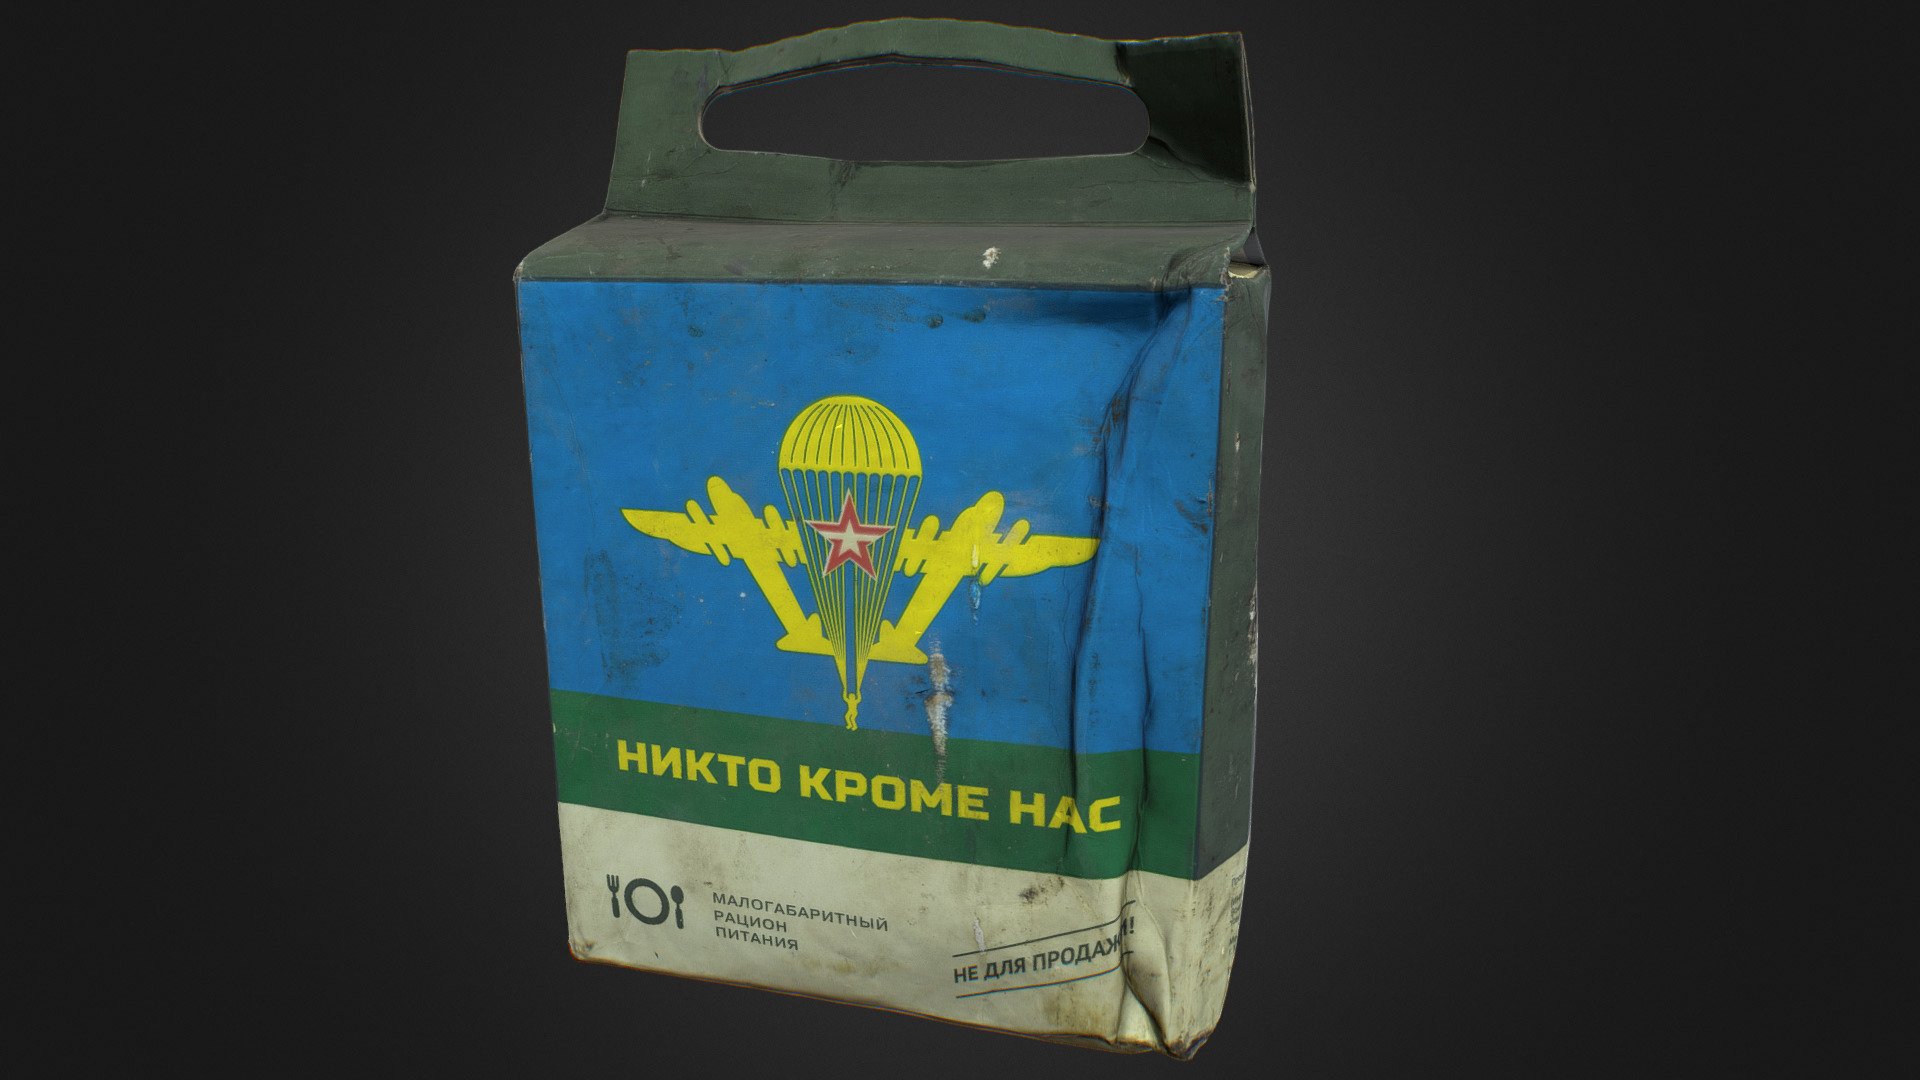 Russian orc food. Pig-dog dry ration, trophy! 

MRE Russian army individual ration food daily 24 hours. Scan High Poly

Including OBJ formats and texture (8192x8192) JPG

Polygons: 101000 Vertices: 50510 - MRE Russian army individual ration food - 3D model by Skeptic (@texturus) 3d model